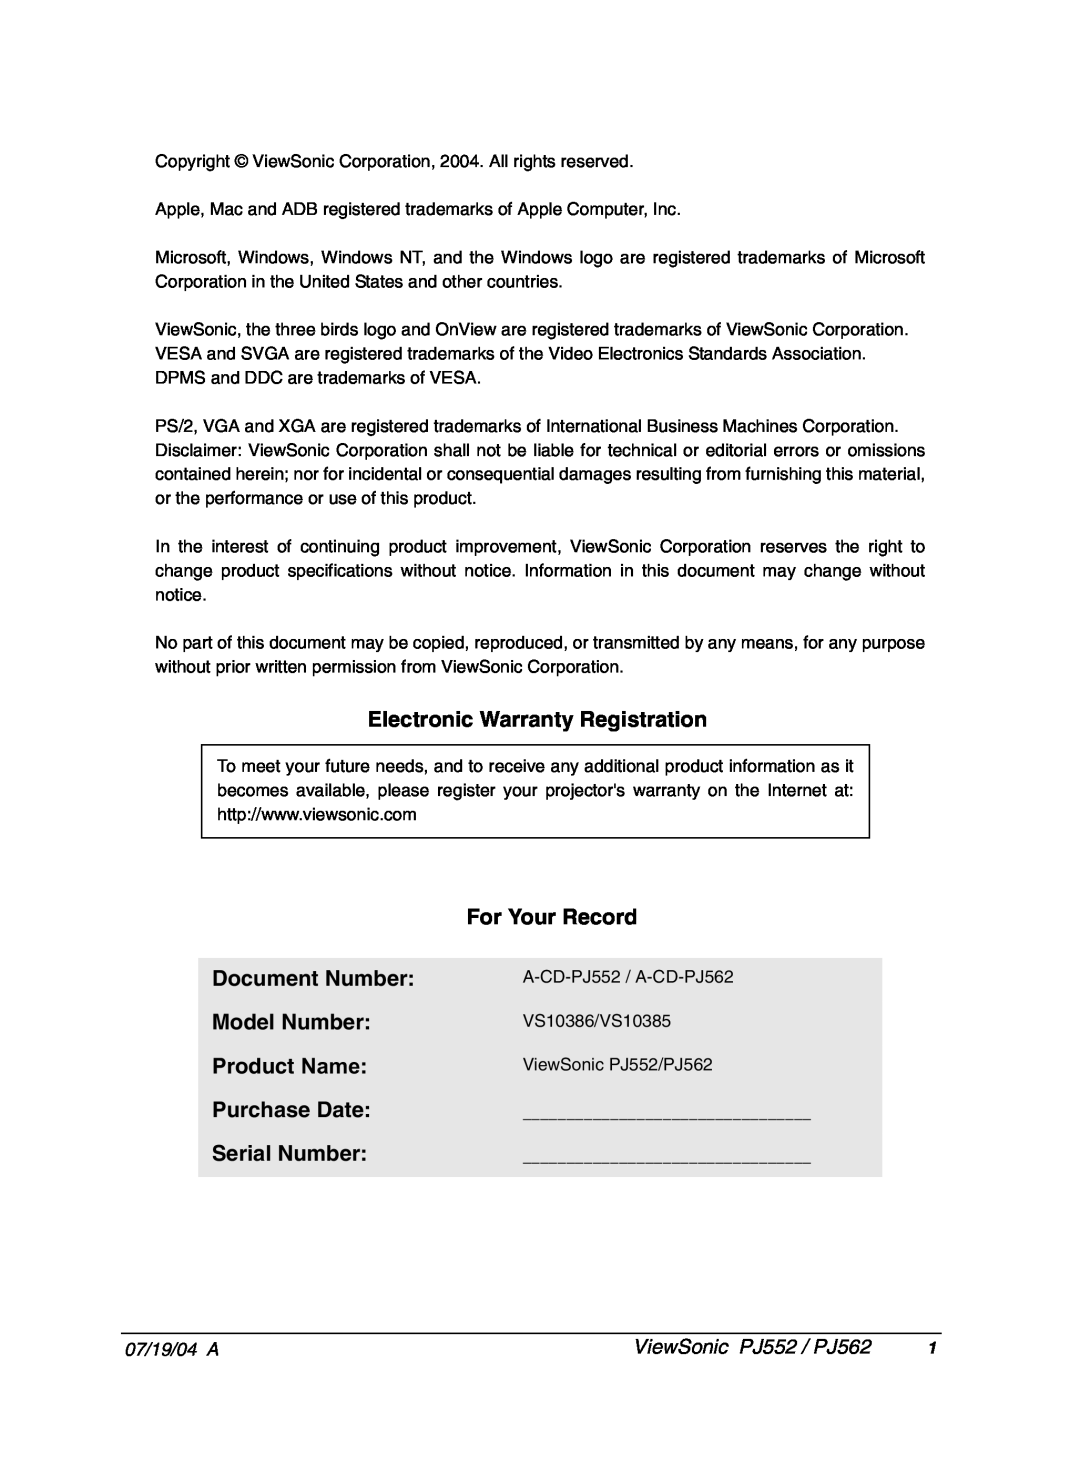 ViewSonic PJ562 Electronic Warranty Registration, For Your Record, Document Number, Model Number, Product Name, 07/19/04 A 